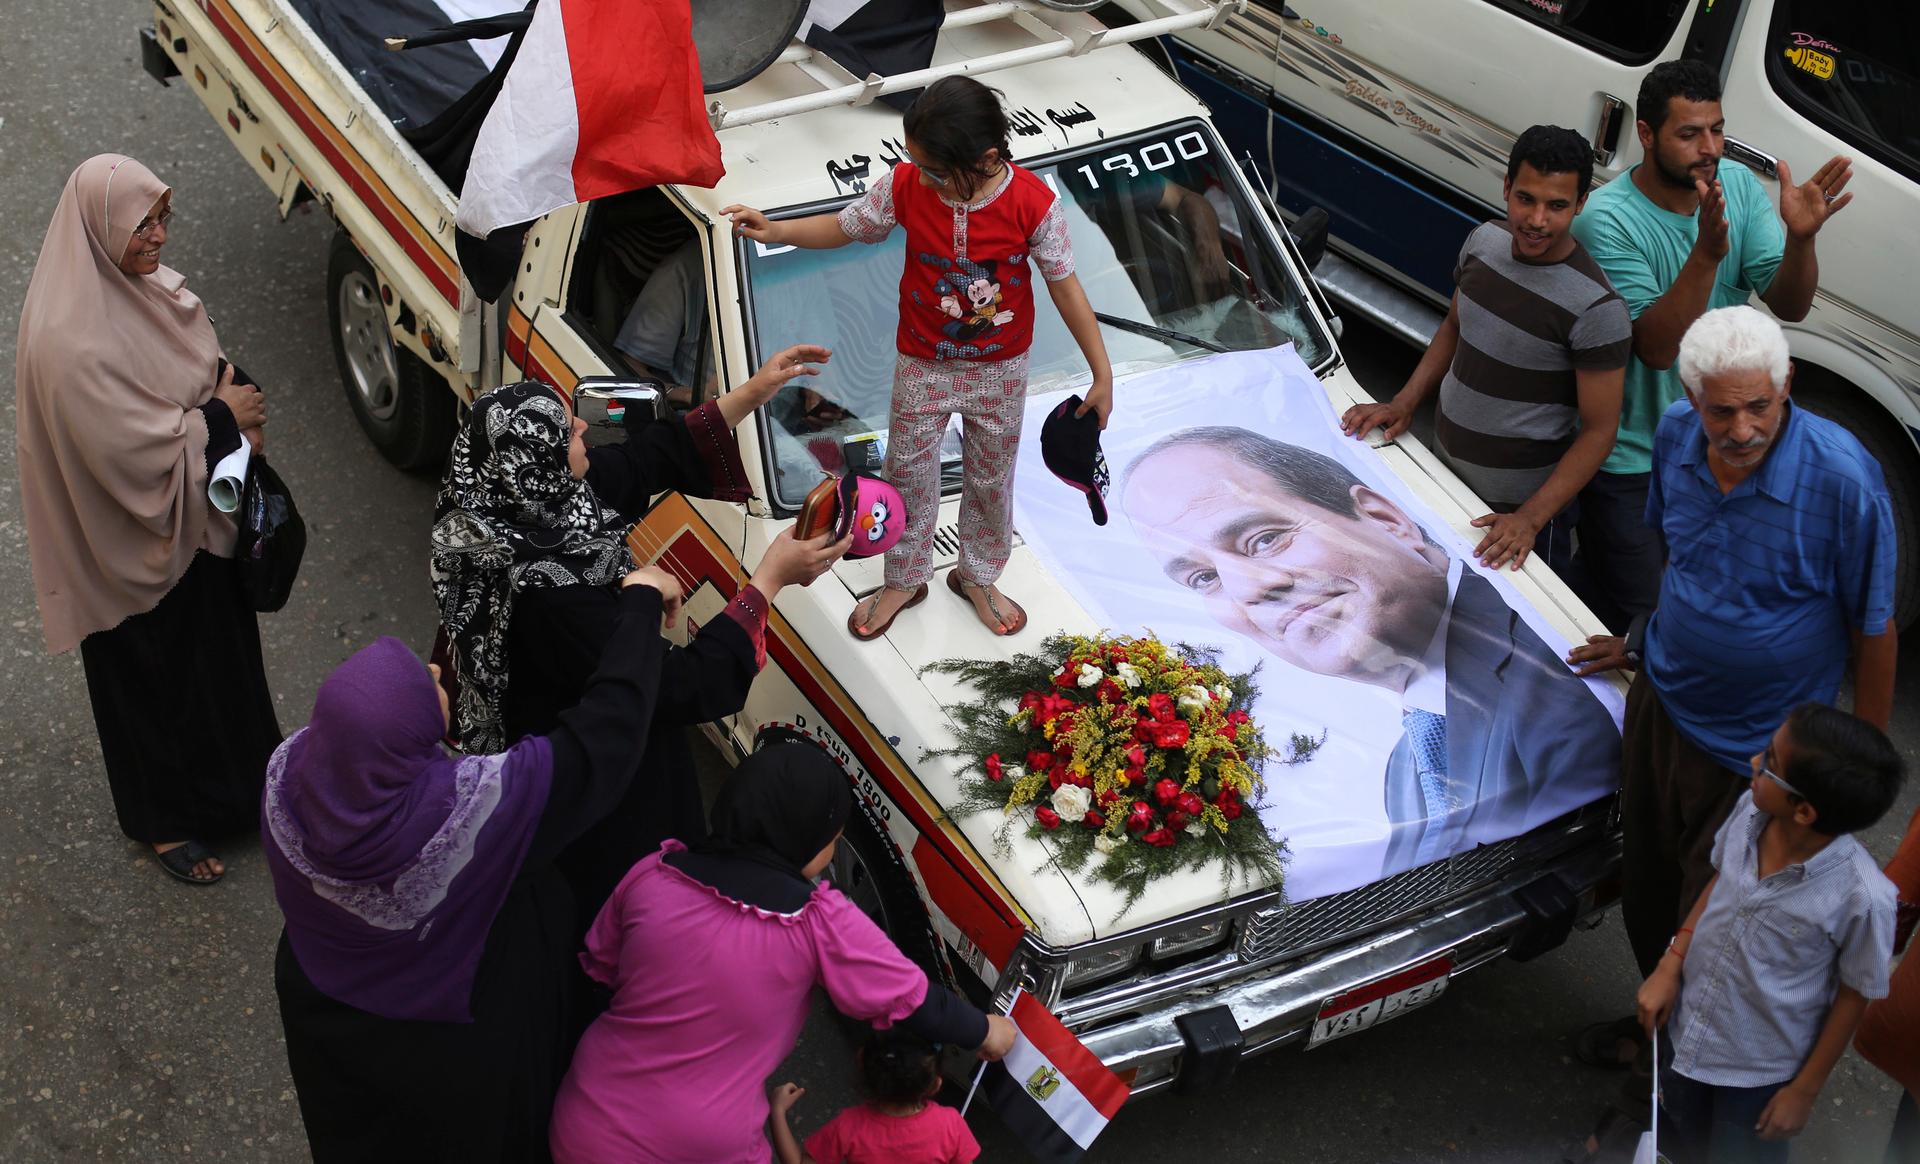 Egypt's government is determined to get more voters to the polls after a lower than expected turnout in a presidential election threatened to undermine the credibility of the frontrunner, former army chief Abdel Fattah al-Sisi.